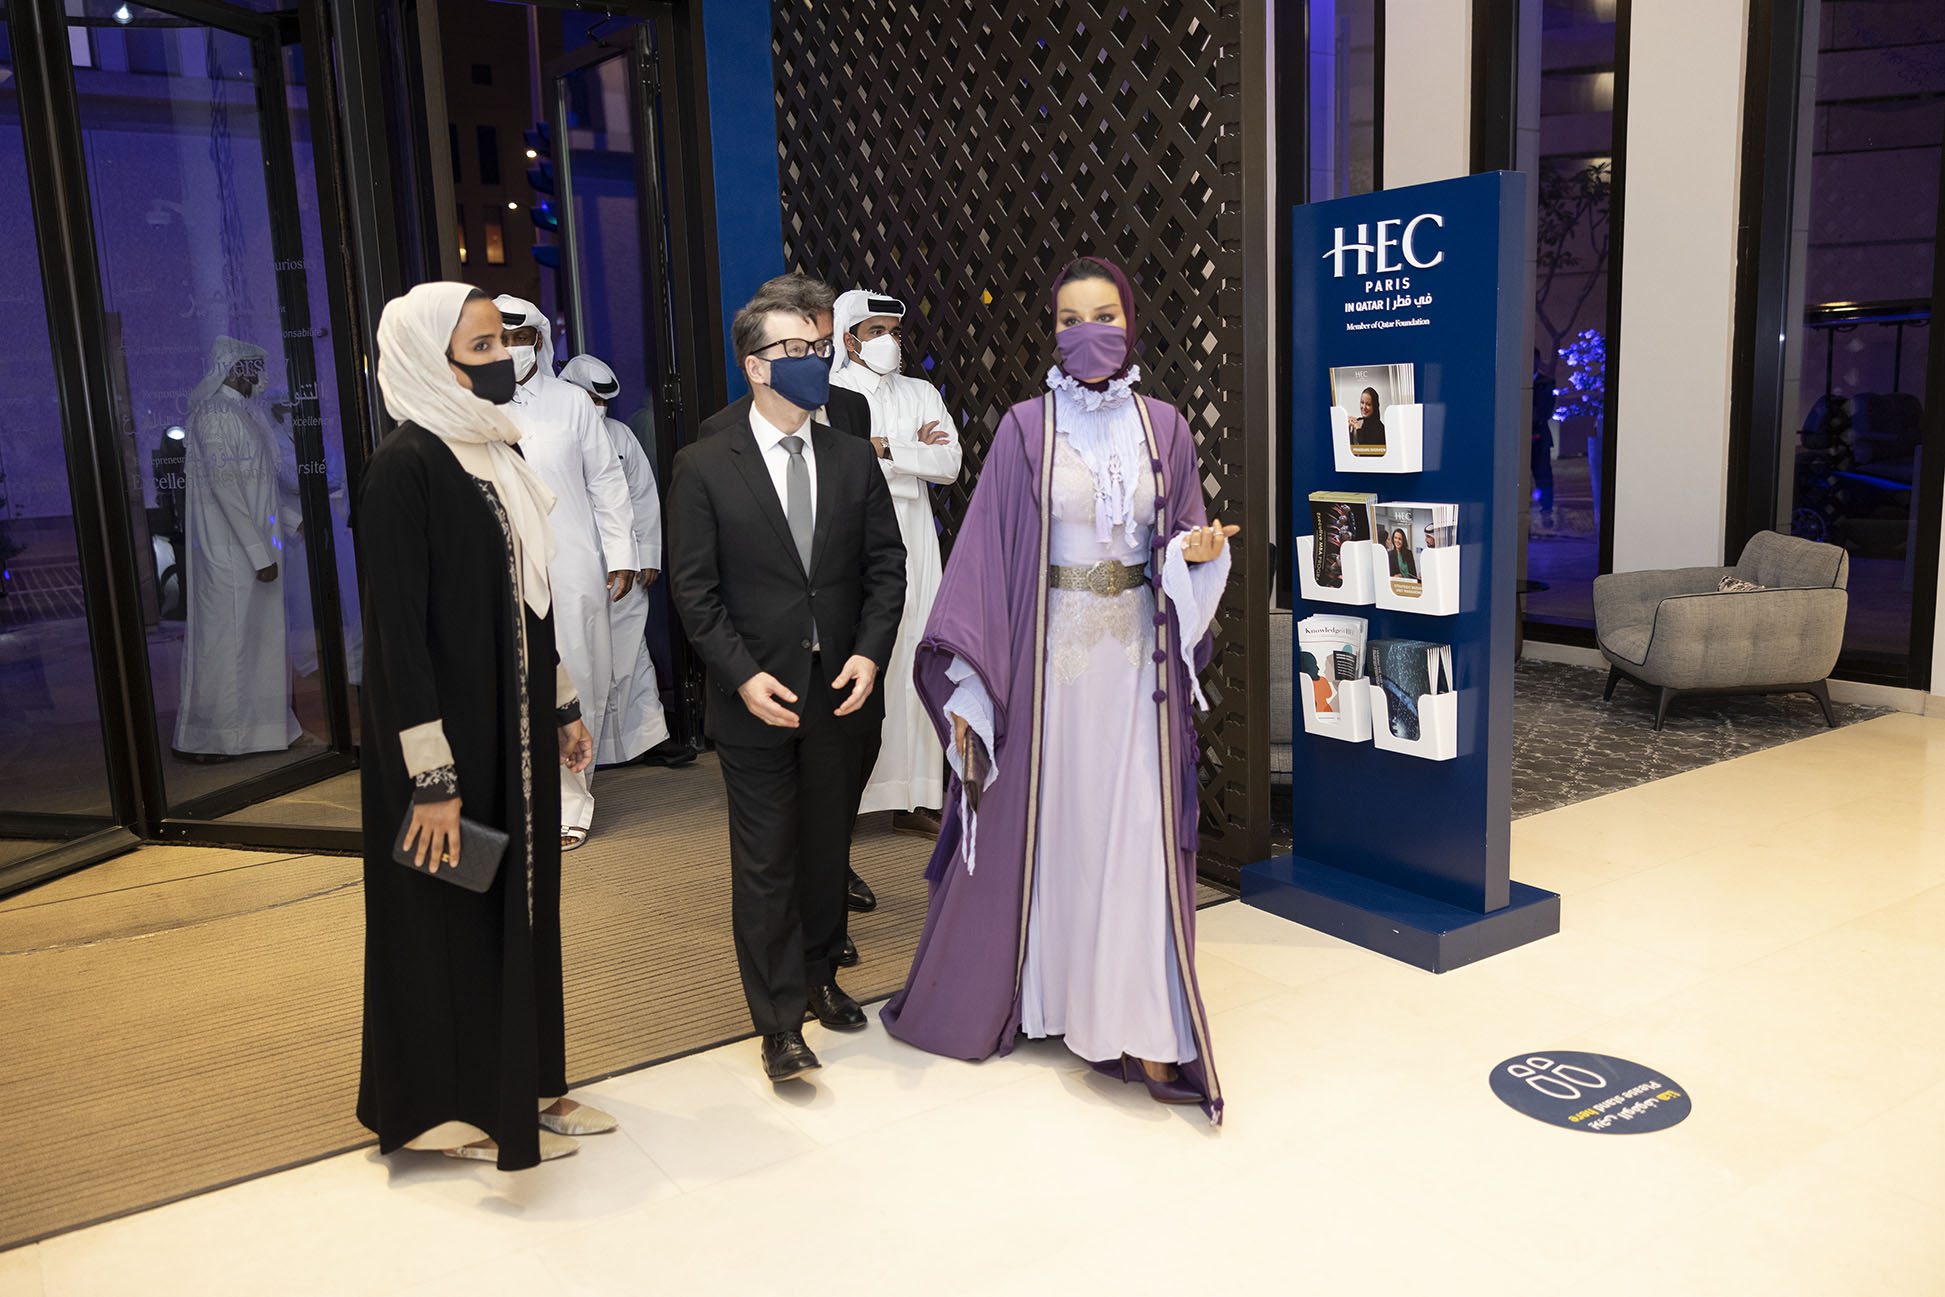 Her Highness officially opened the new building of HEC Paris in Qatar, a Qatar Foundation partner university, and toured the facility, accompanied by Her Excellency Sheikha Hind bin Hamad Al Thani, Vice-Chairperson and CEO of Qatar Foundation and a HEC Paris in Qatar alumna. 